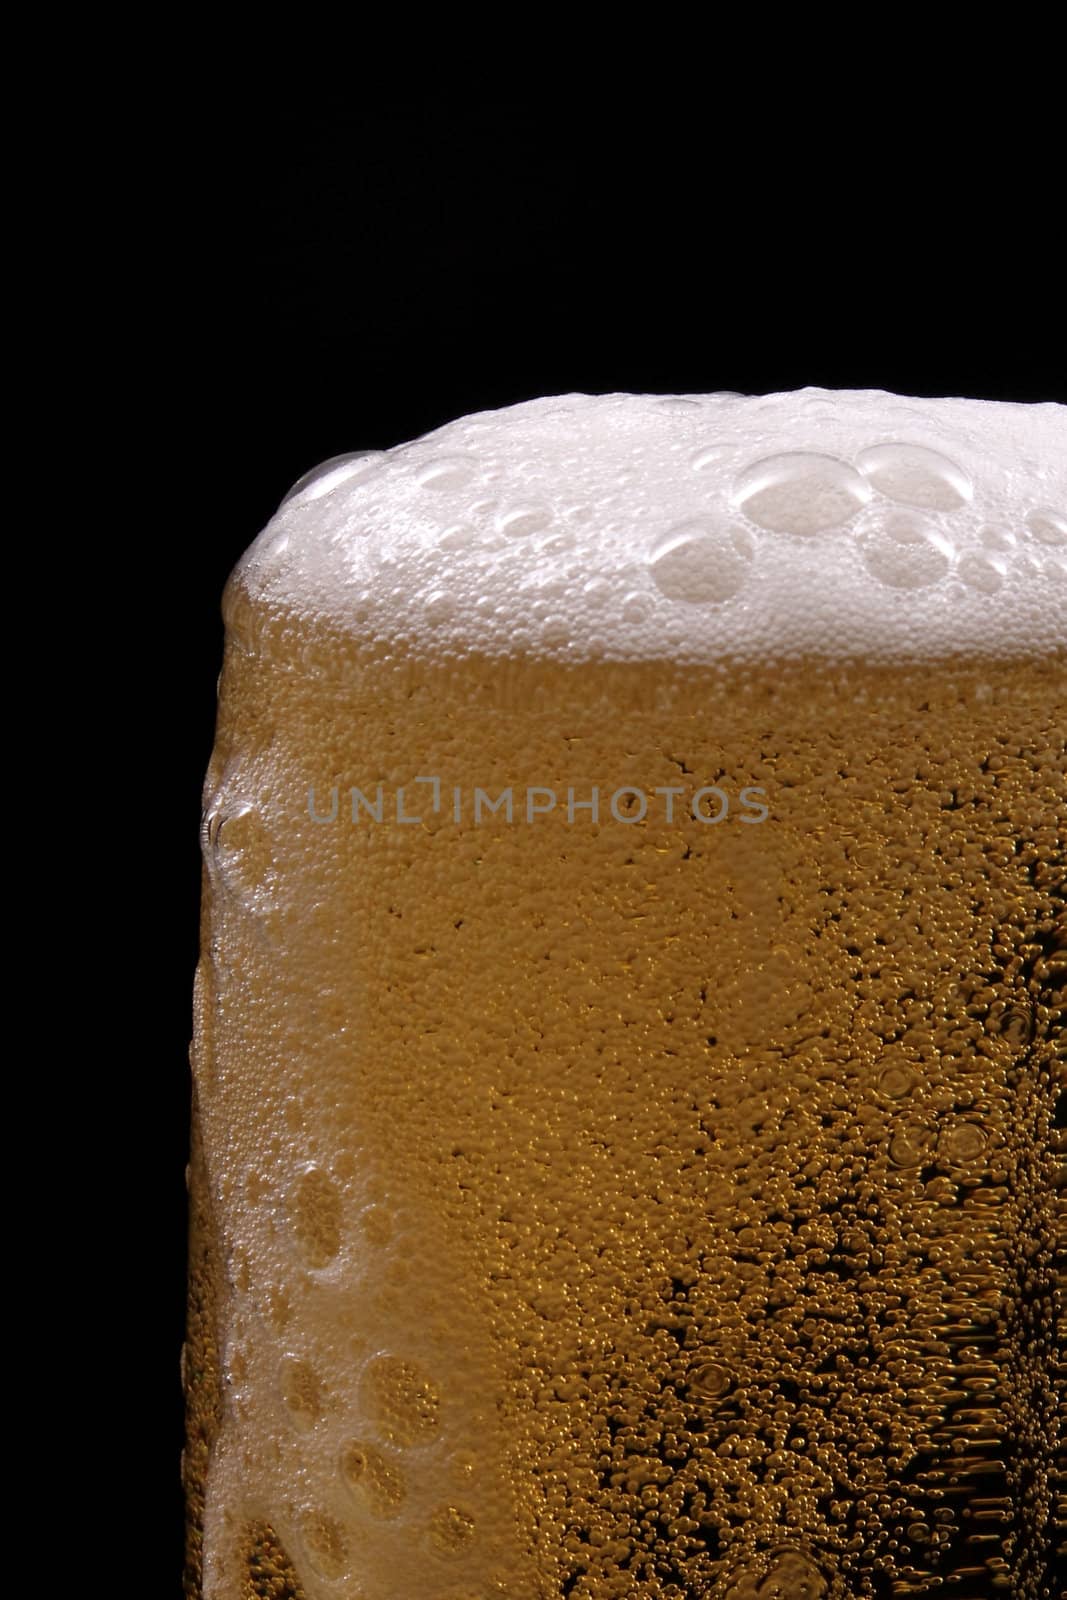 A glass of beer against black background 
